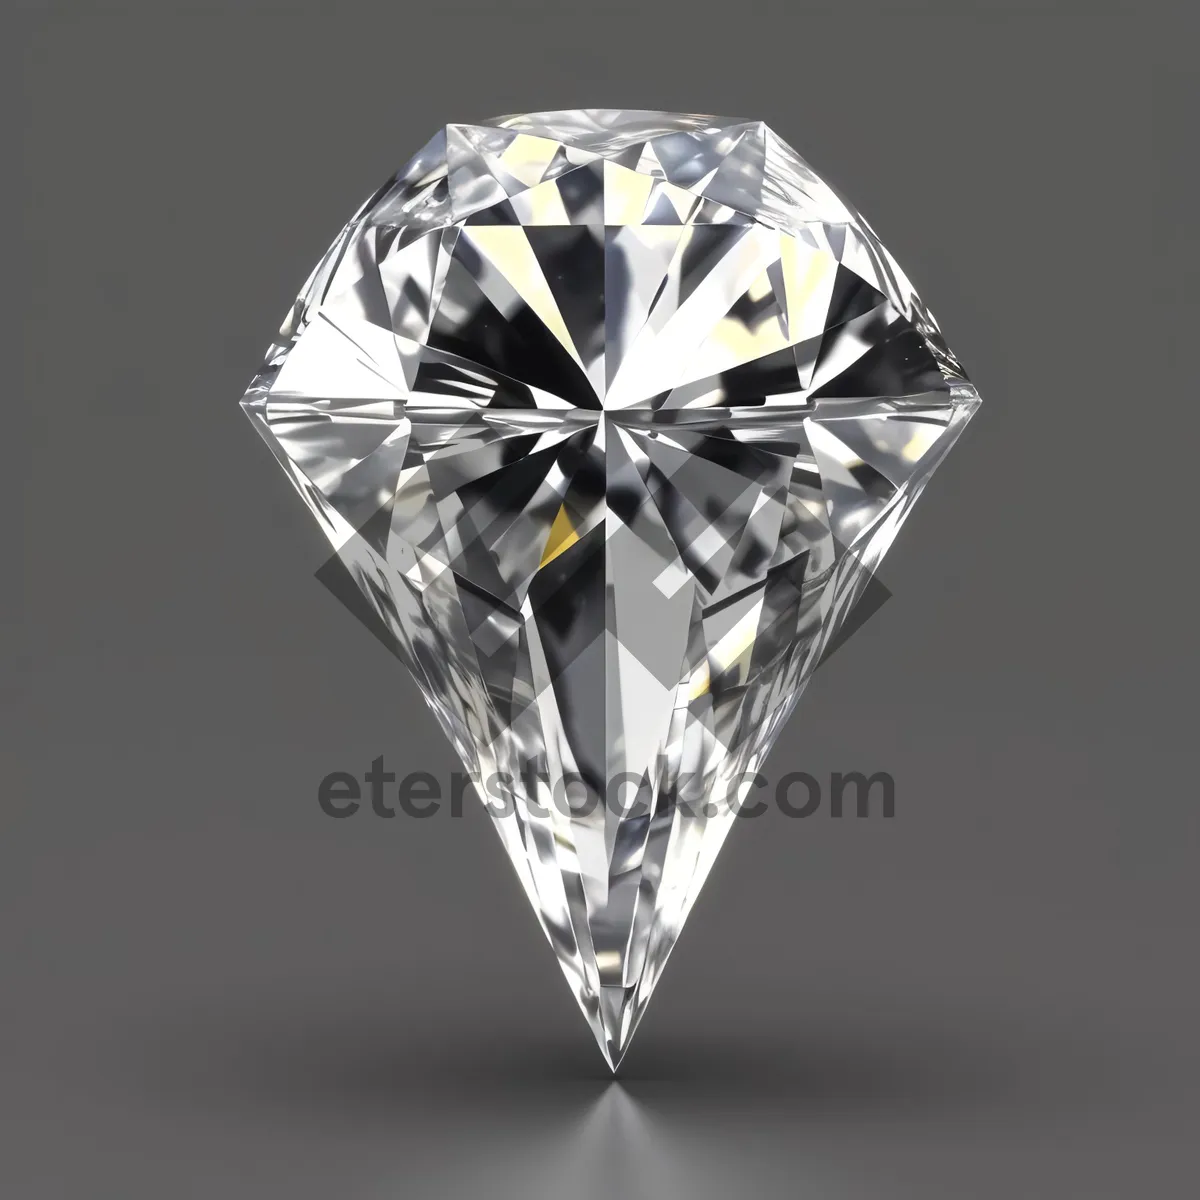 Picture of Sparkling Diamond Gemstone in Clear Glass